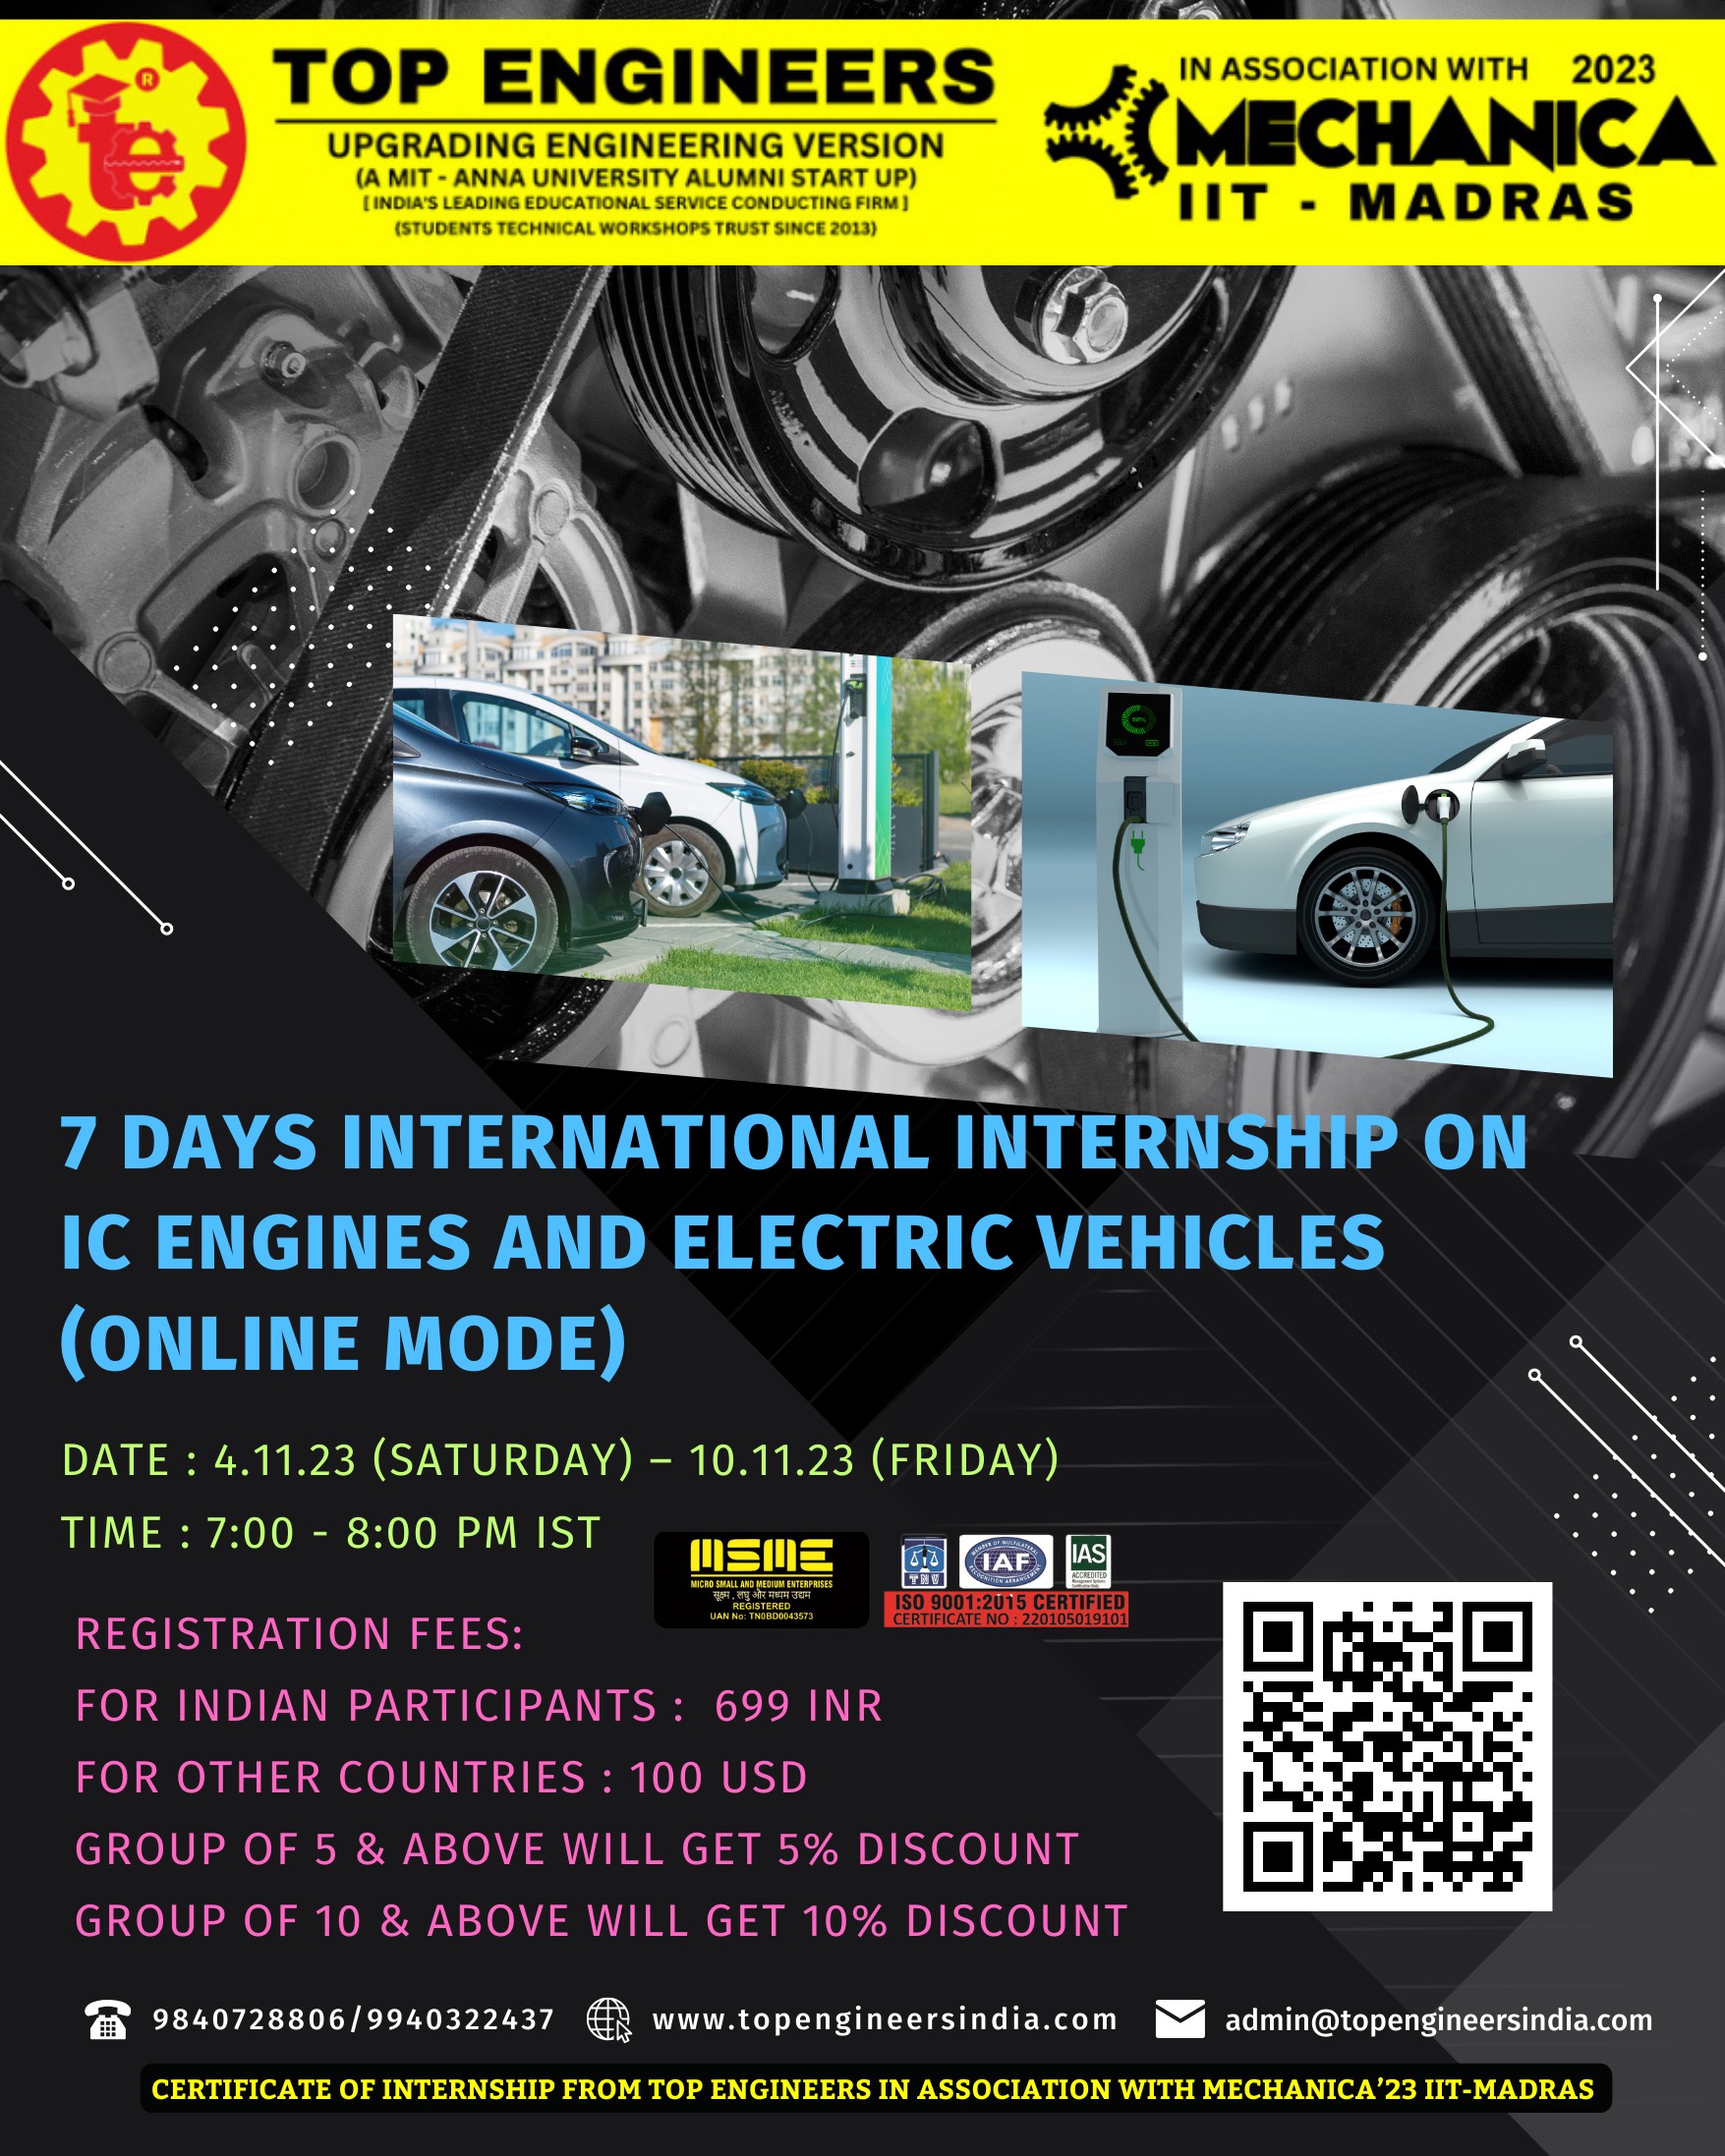 7 Days International Internship on IC Engines and Electric Vehicles (Online Mode) 2023